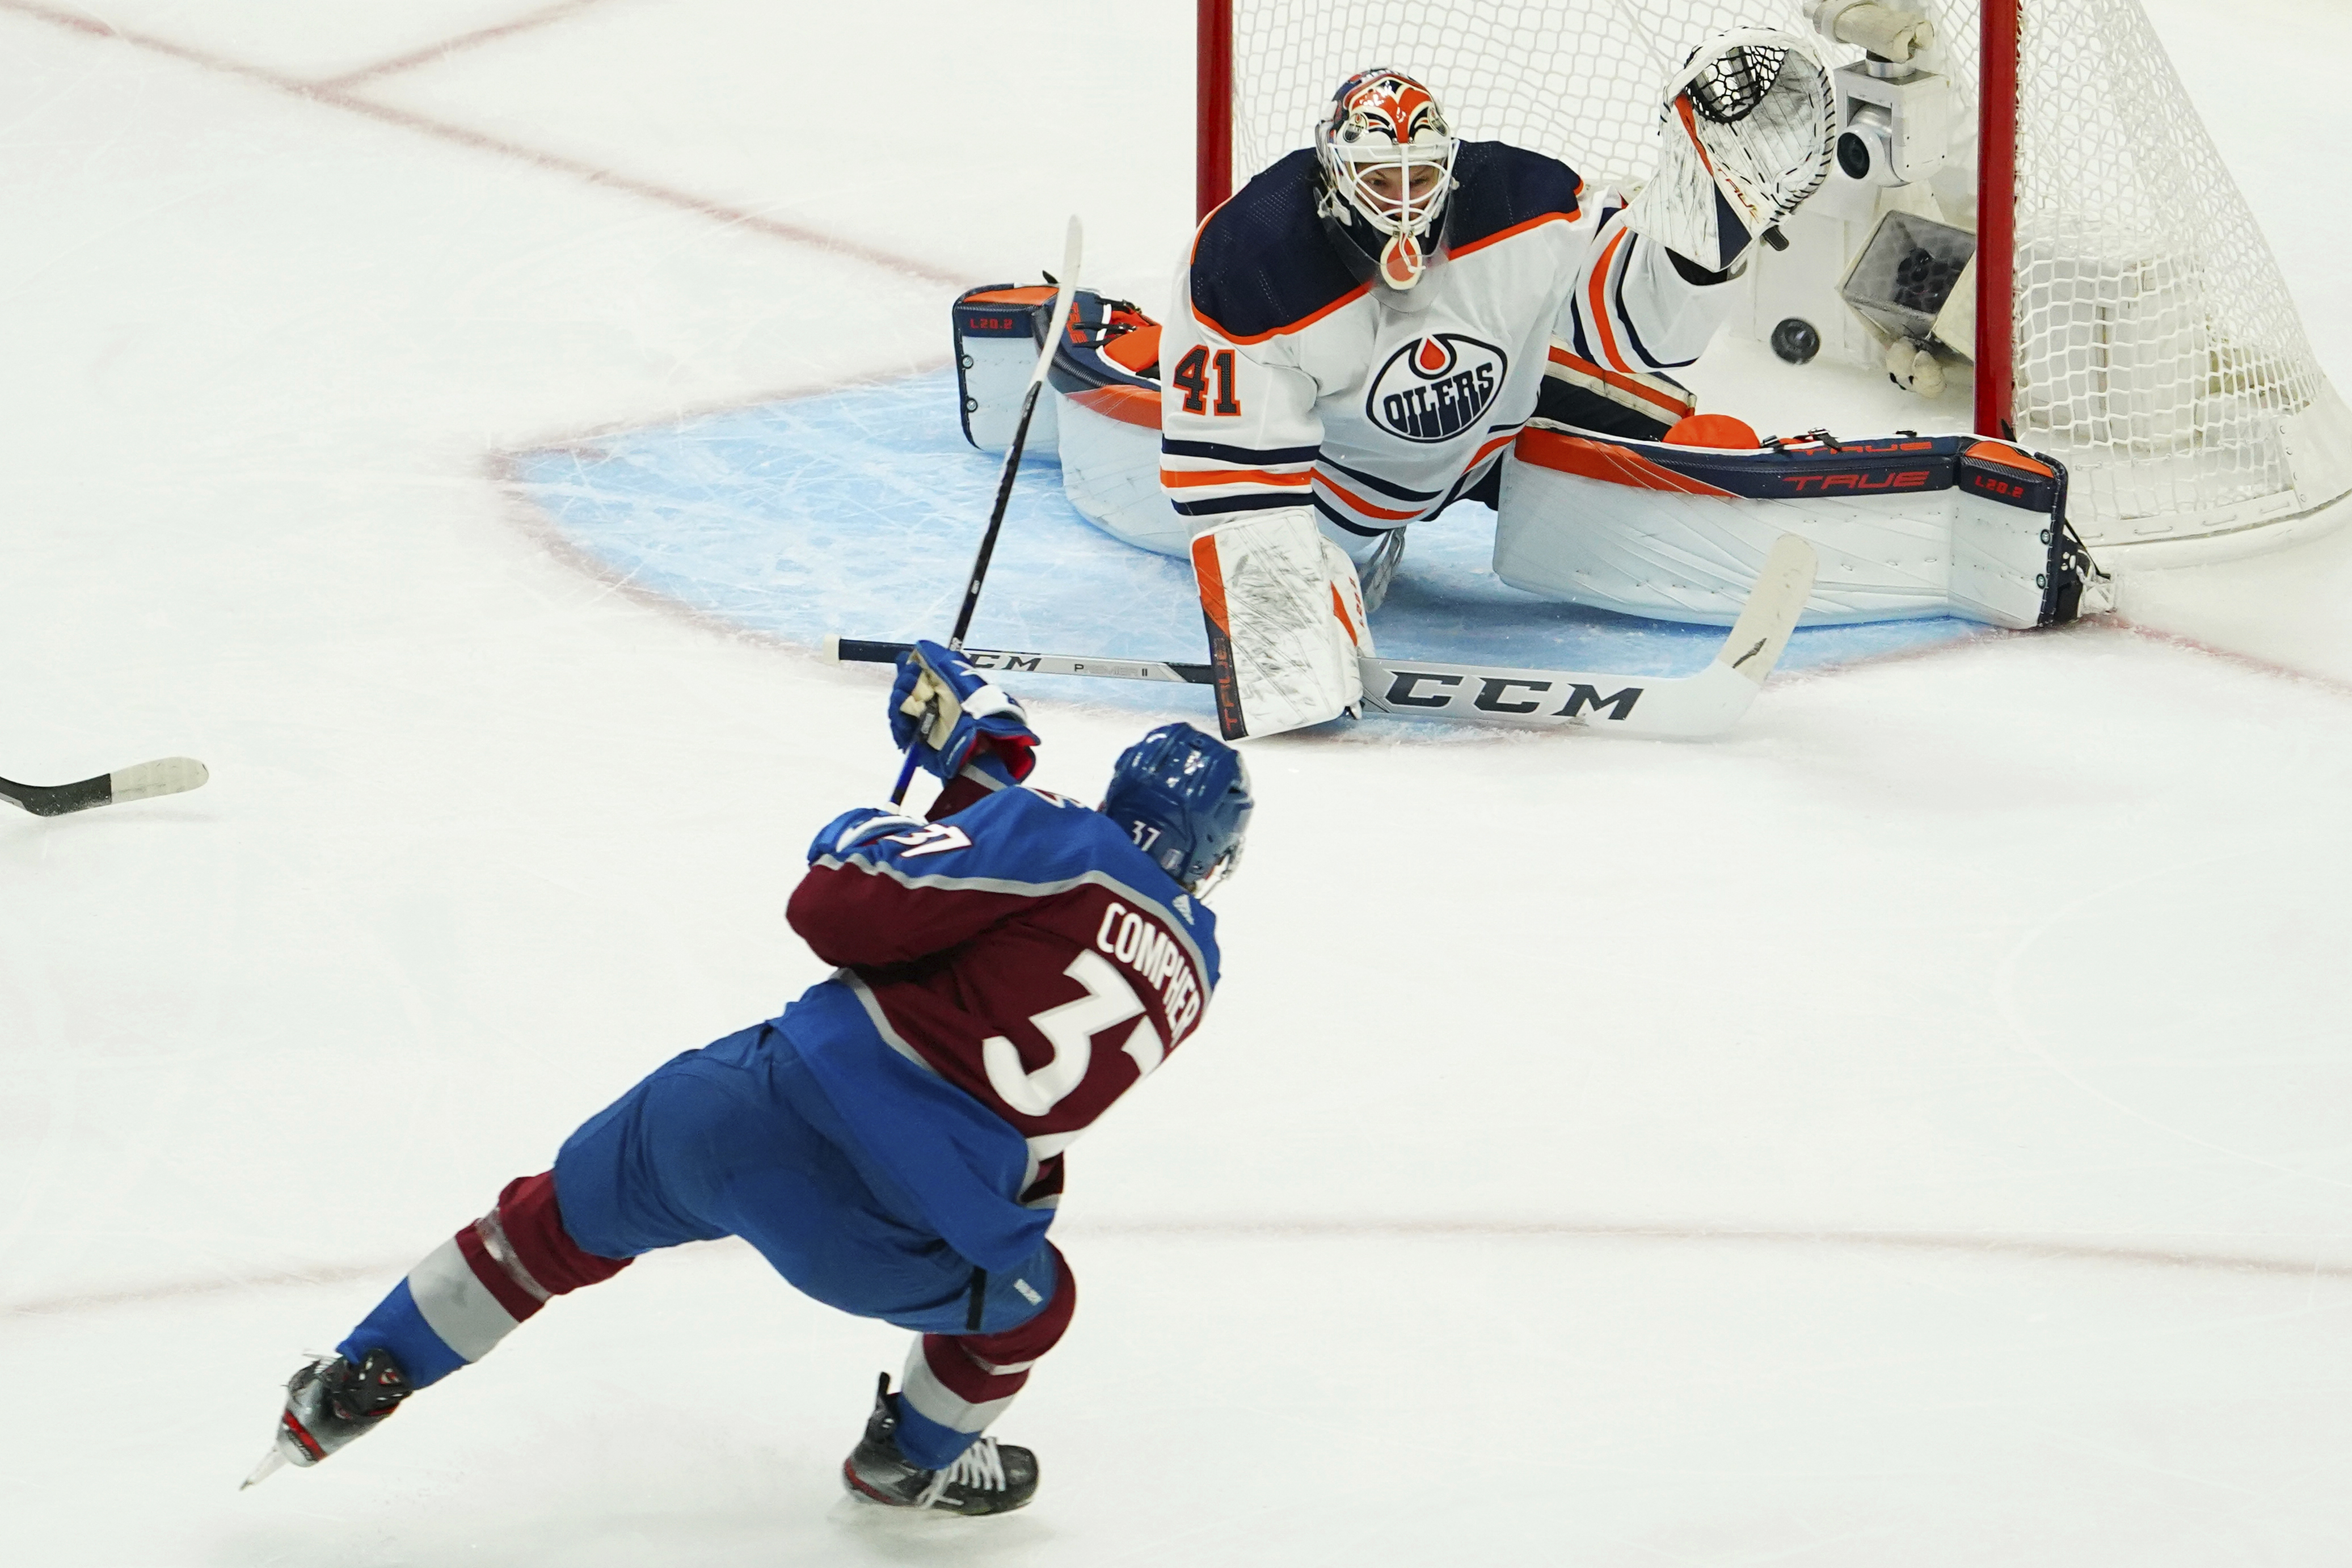 Edmonton Oilers at Colorado Avalanche Free Live Stream (6/2/22) How to Watch NHL Playoffs, Western Conference Finals, time, TV channel, odds